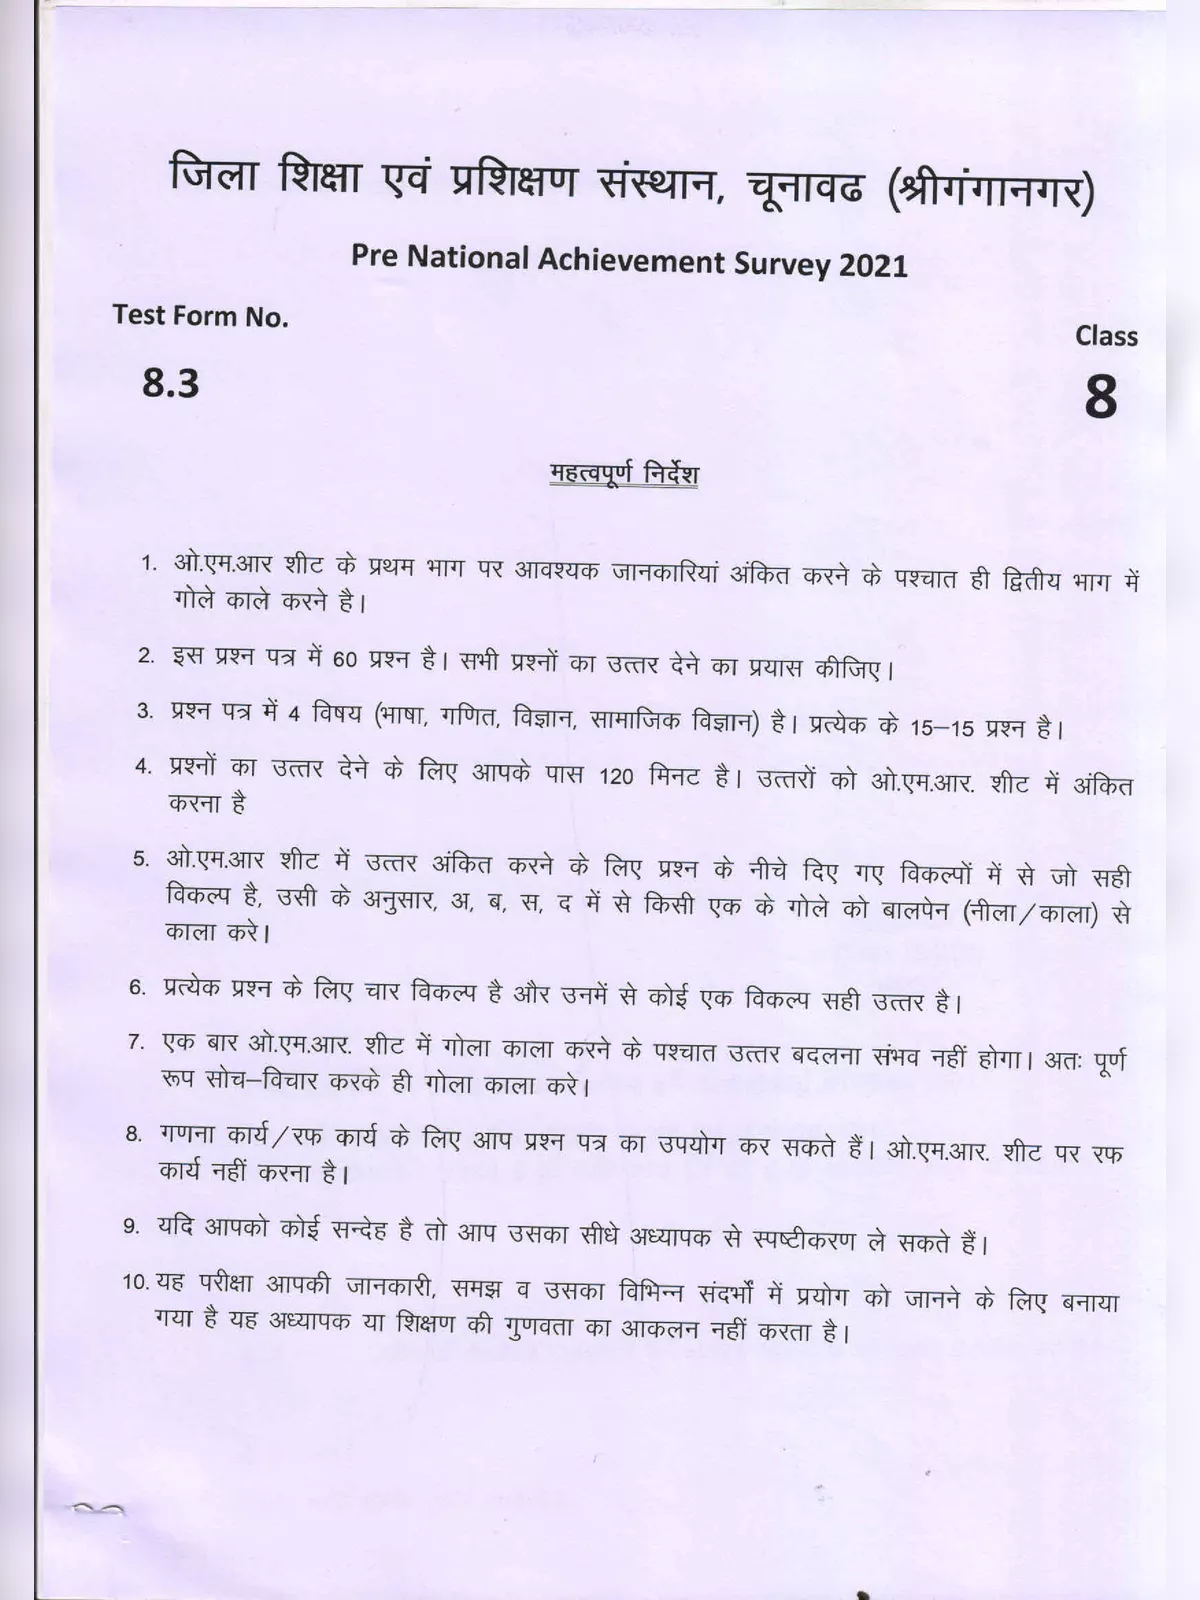 National Achievement Survey Questions and Answer